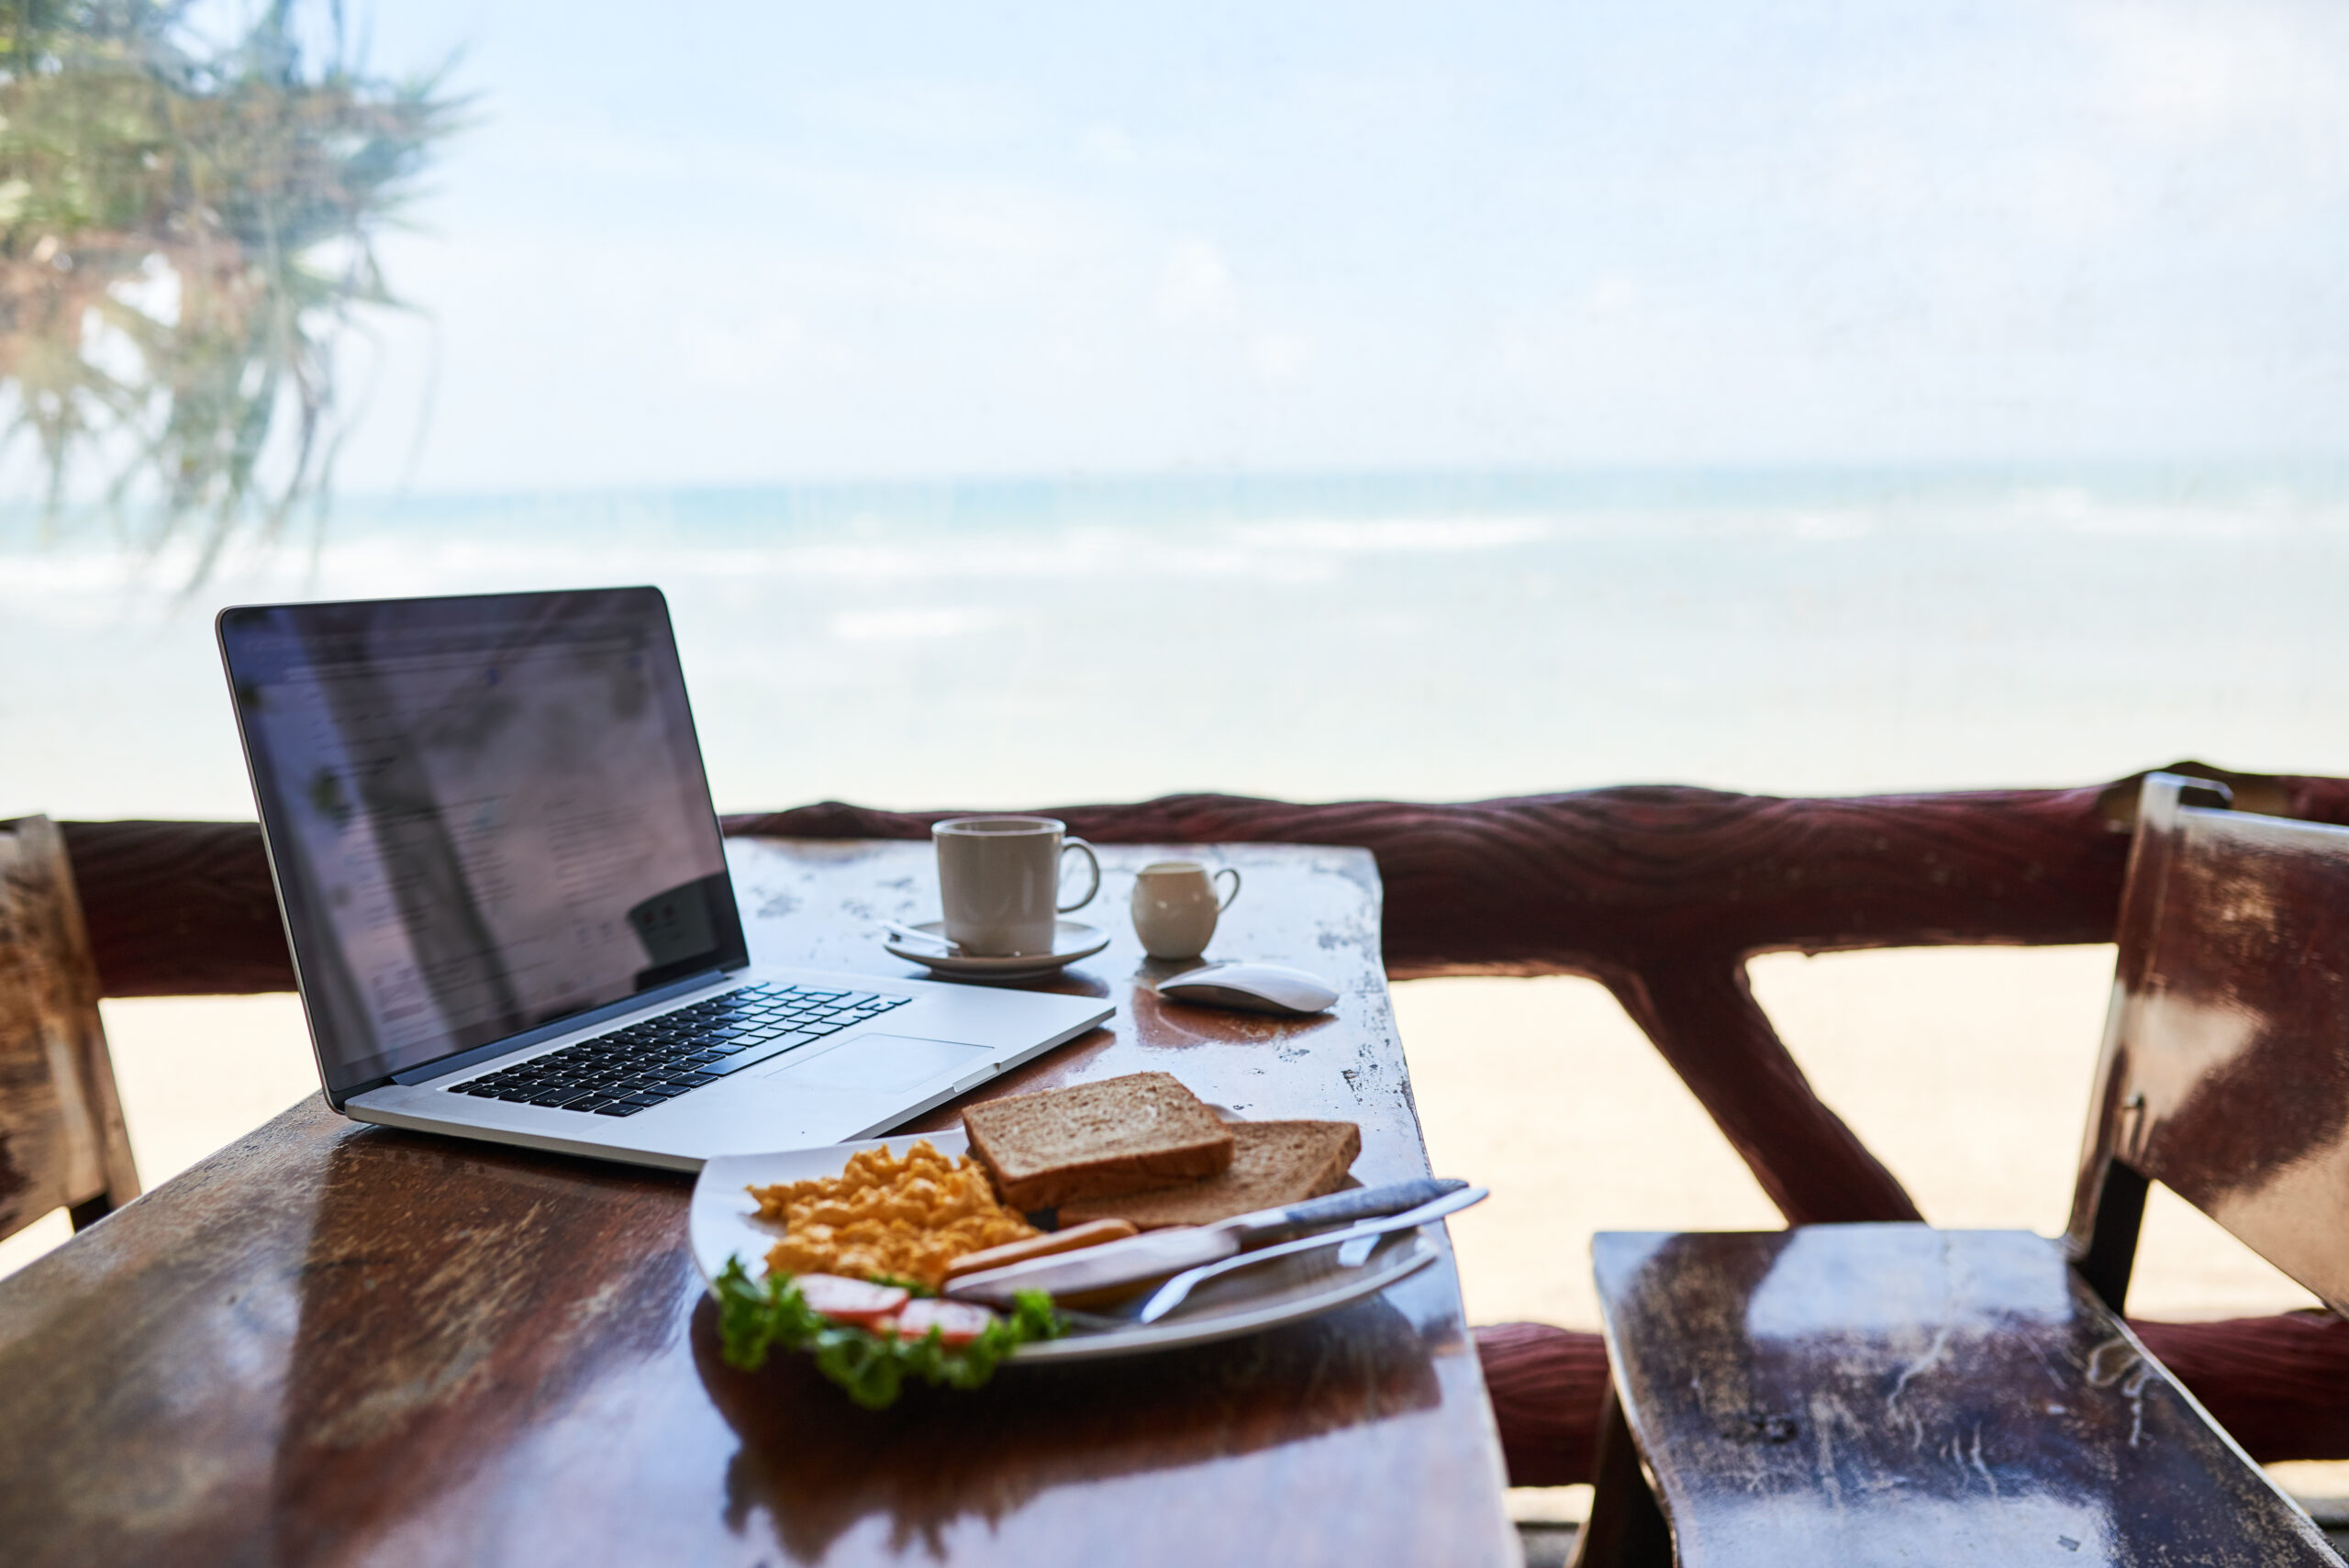 Shot of a laptop and freshly made breakfast on a table with a view of the beach in the background